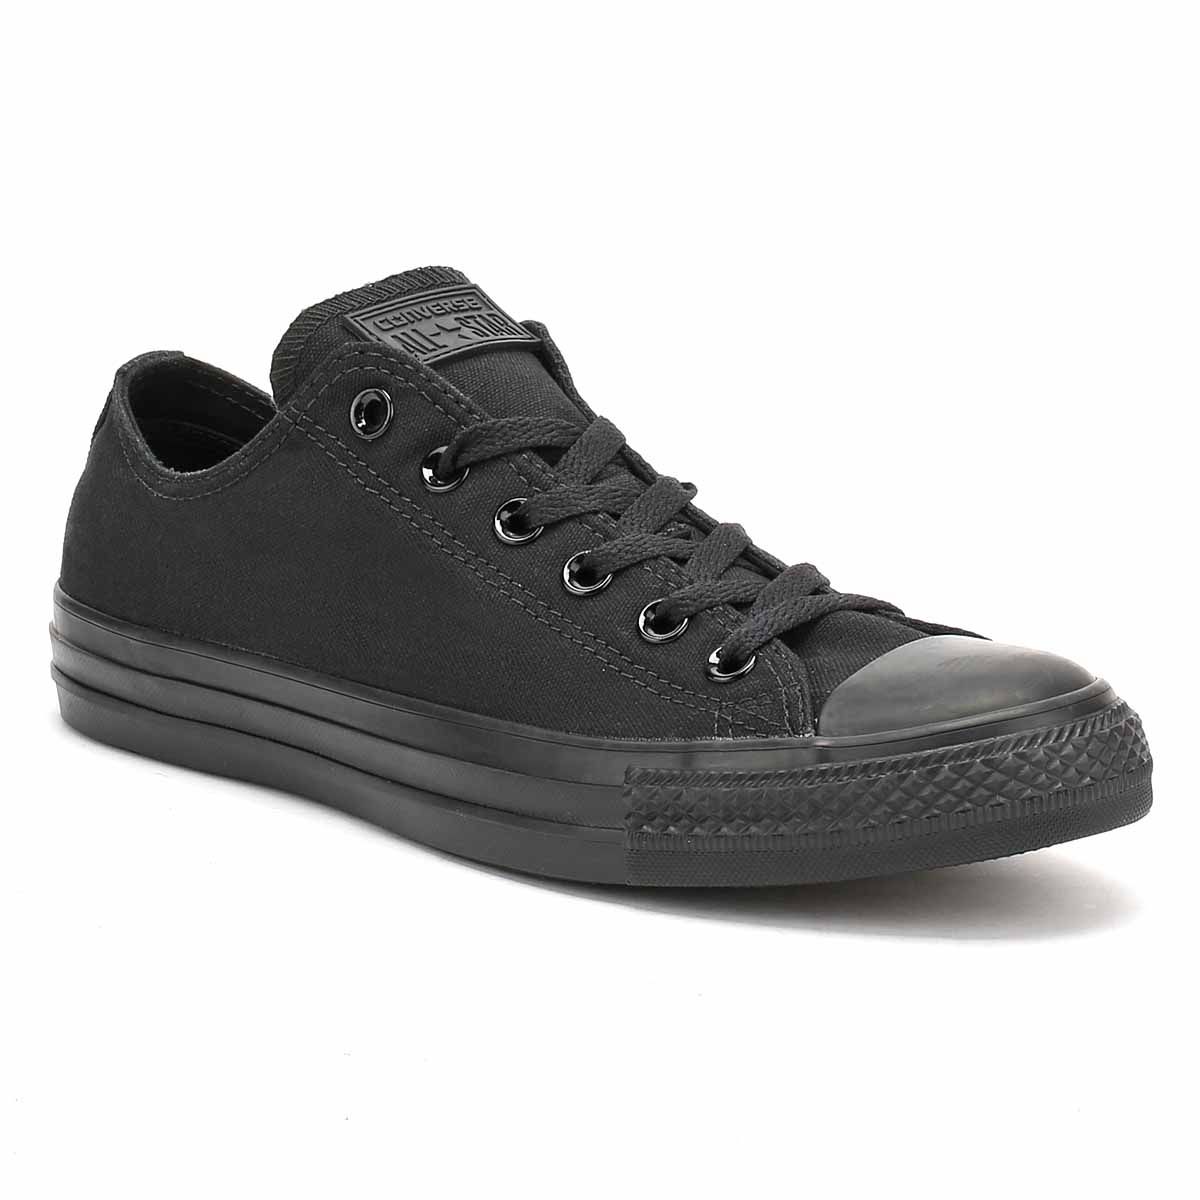 The monochrome from Converse its not your ordinary Converse. The black canvas upper has a matching rubber sole with the unmistakable diamond tread. It also has the All Star label and matching branding on the heel.